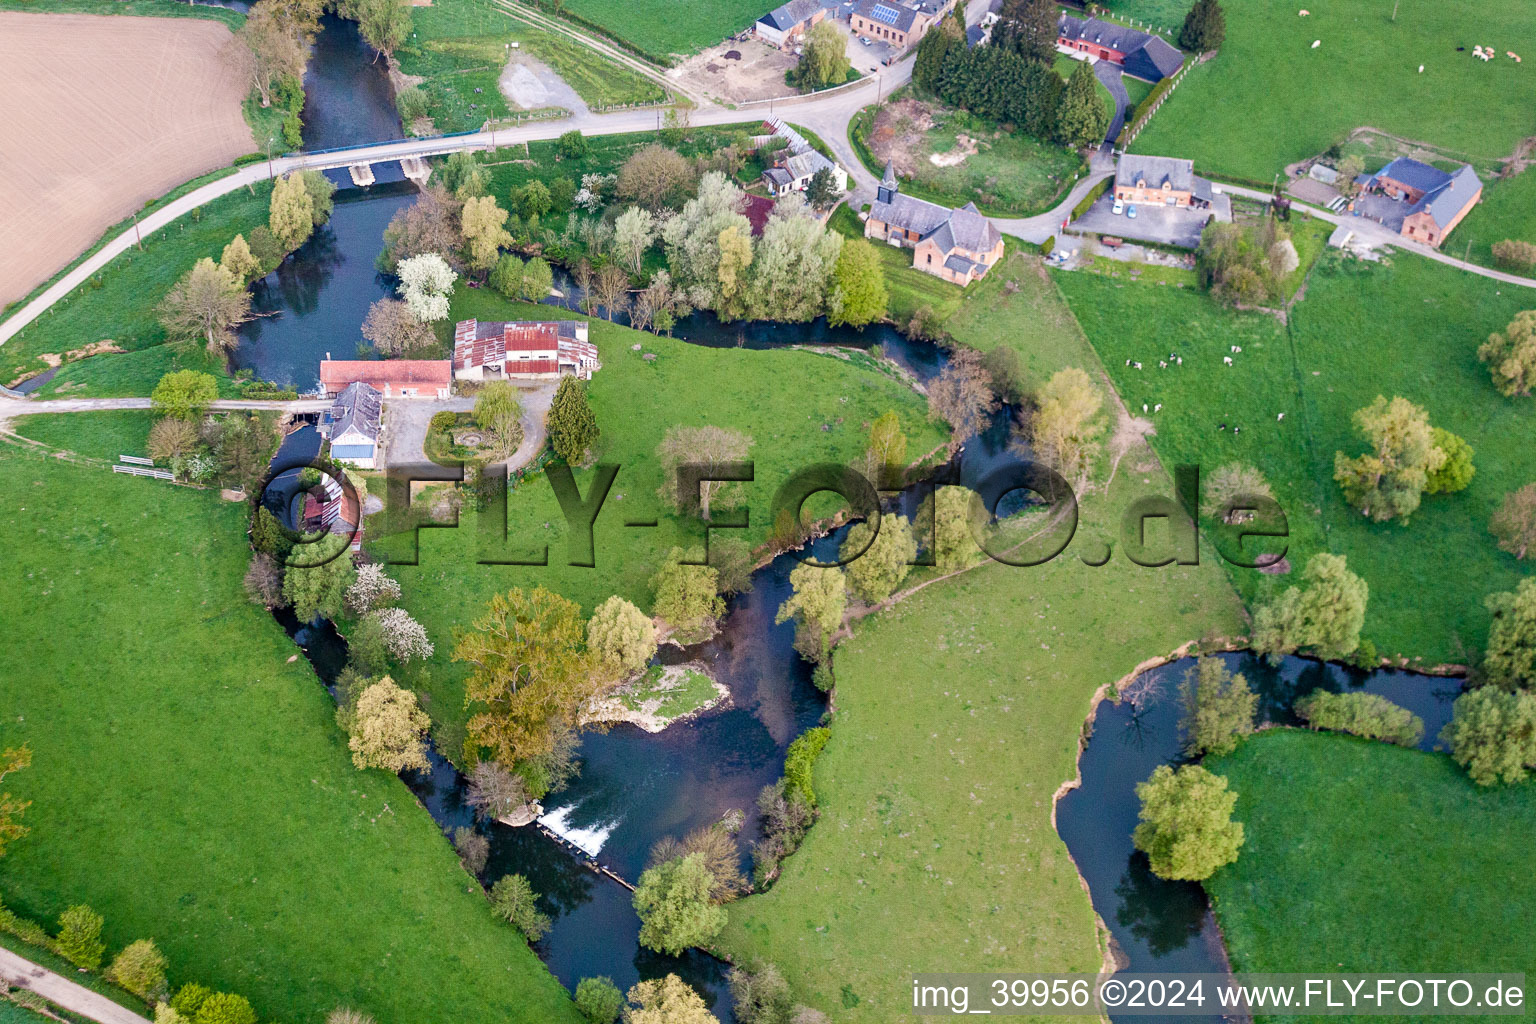 Curved loop of the riparian zones on the course of the river Oise in Erloy in Hauts-de-France, France